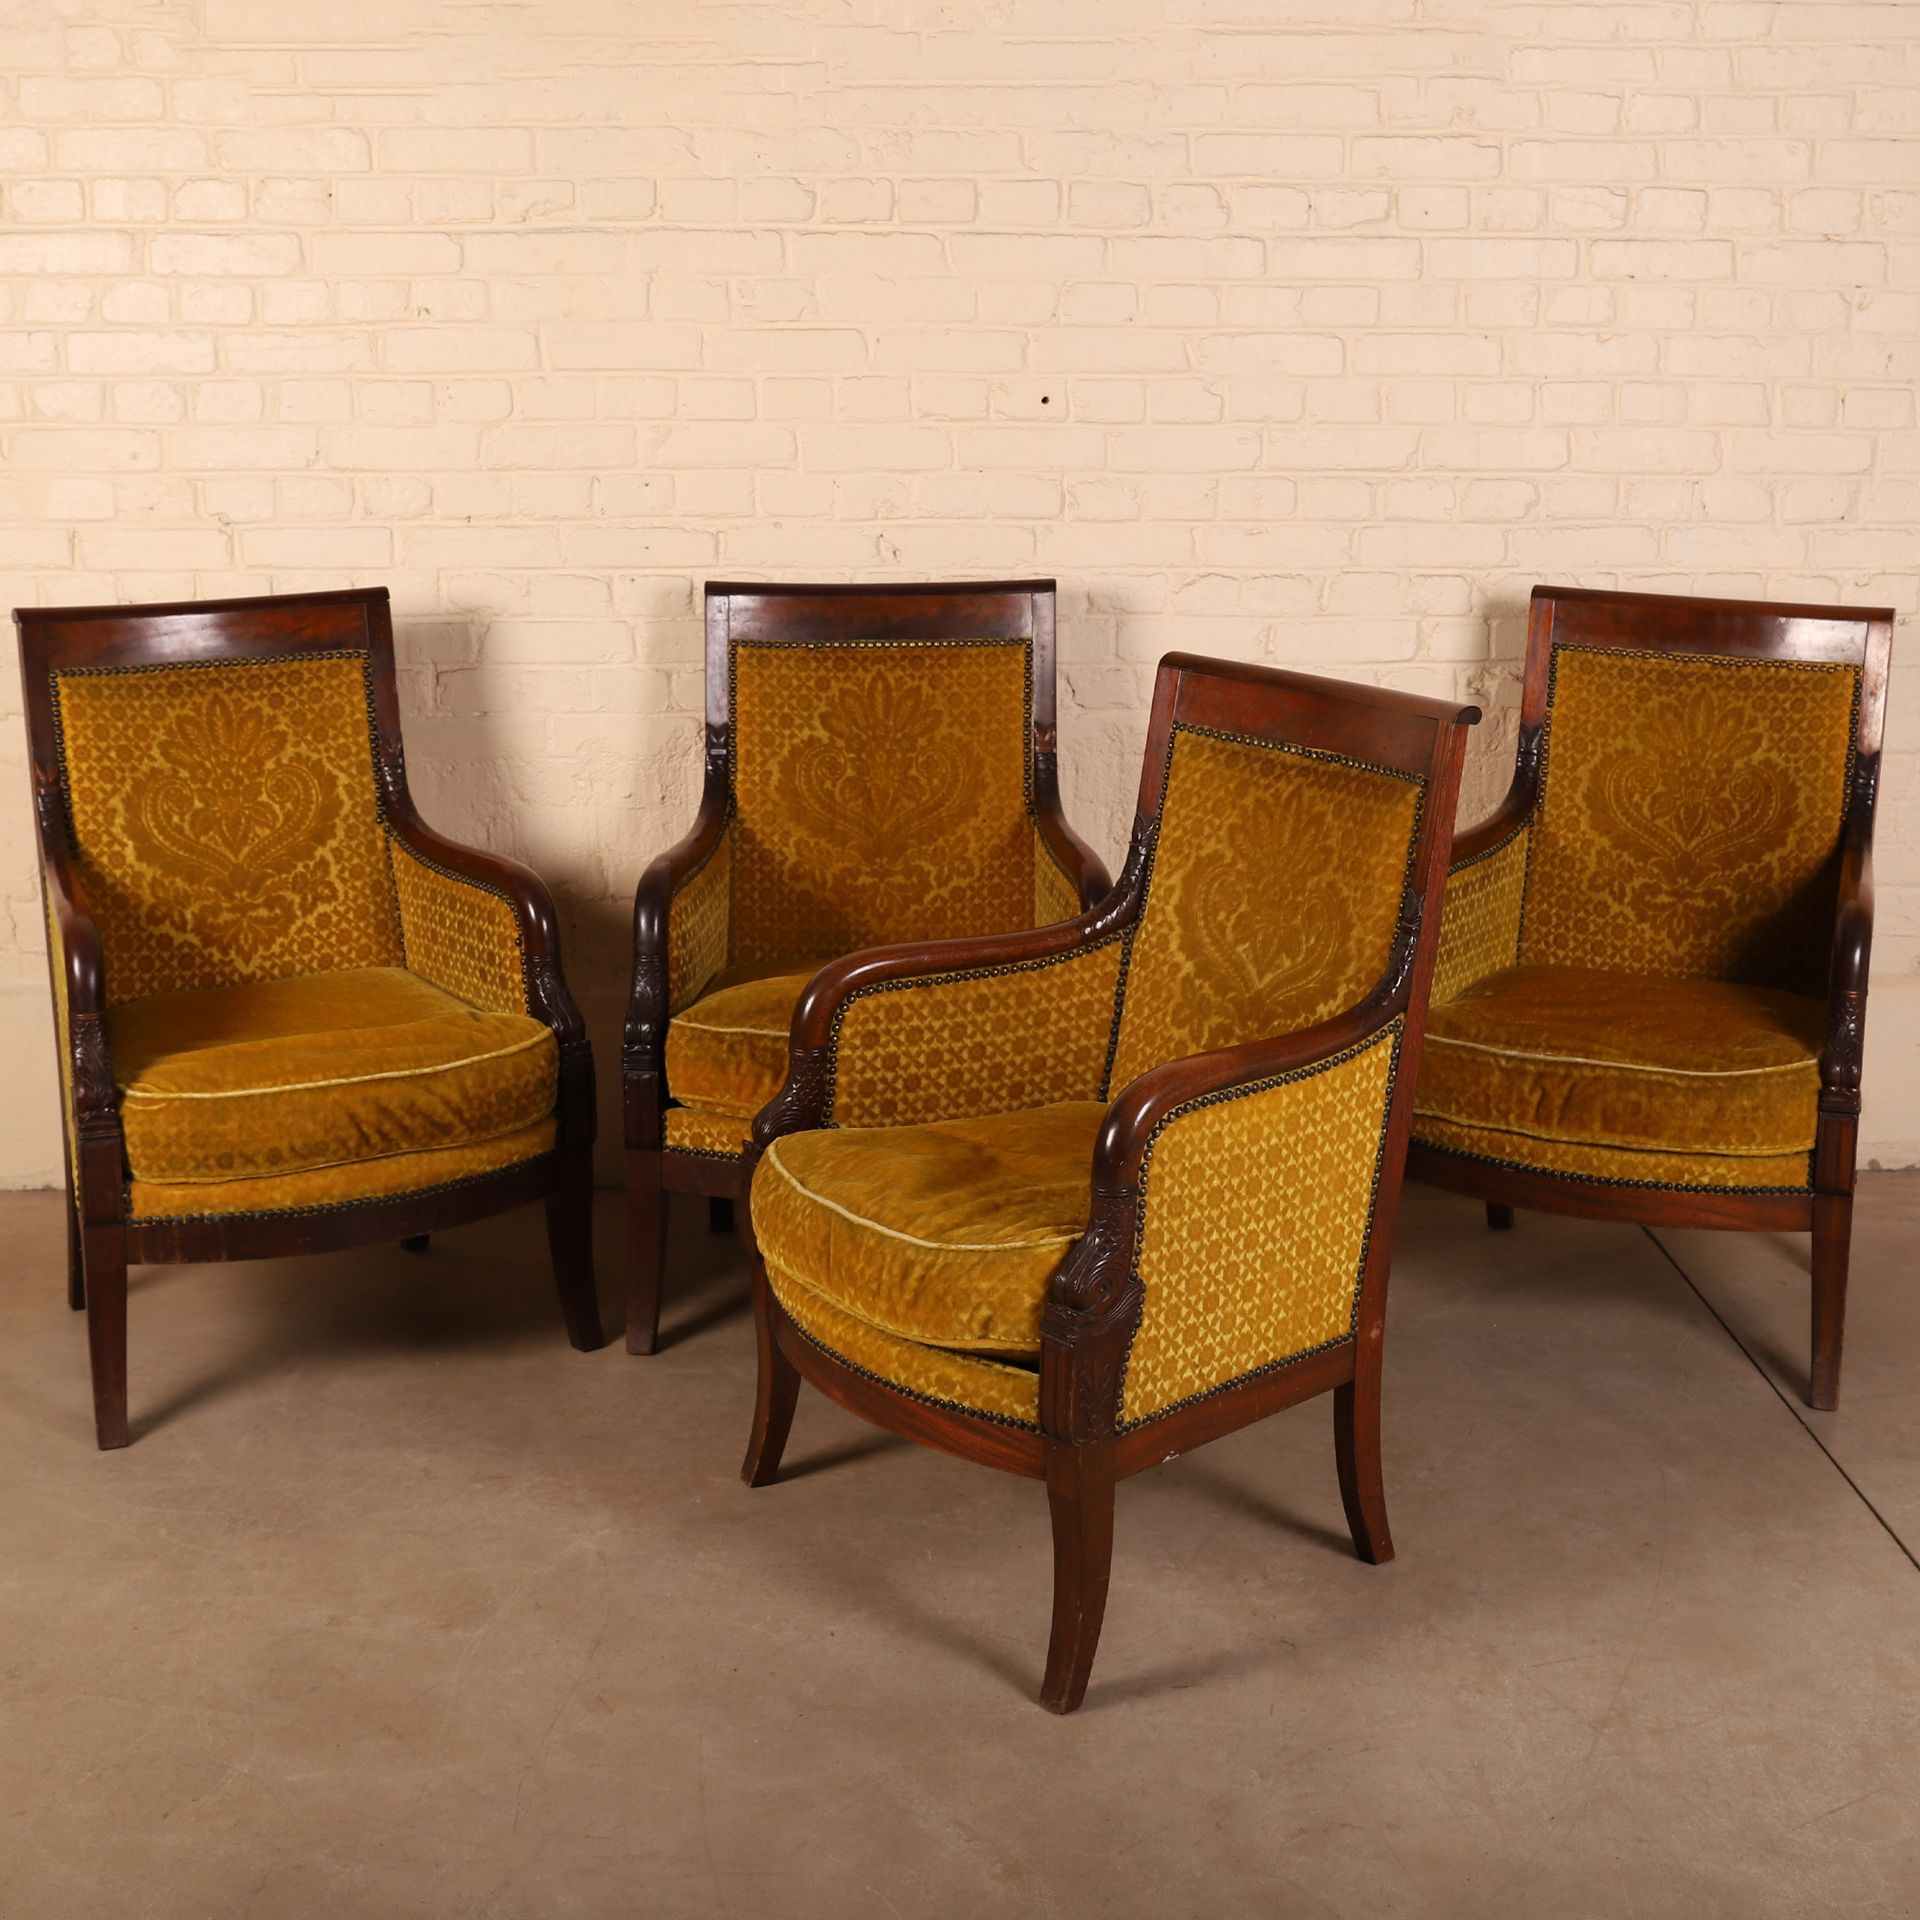 Null SET OF FOUR EMPIRE CHAIRS, 19th century

Upholstered in mustard yellow

Han&hellip;